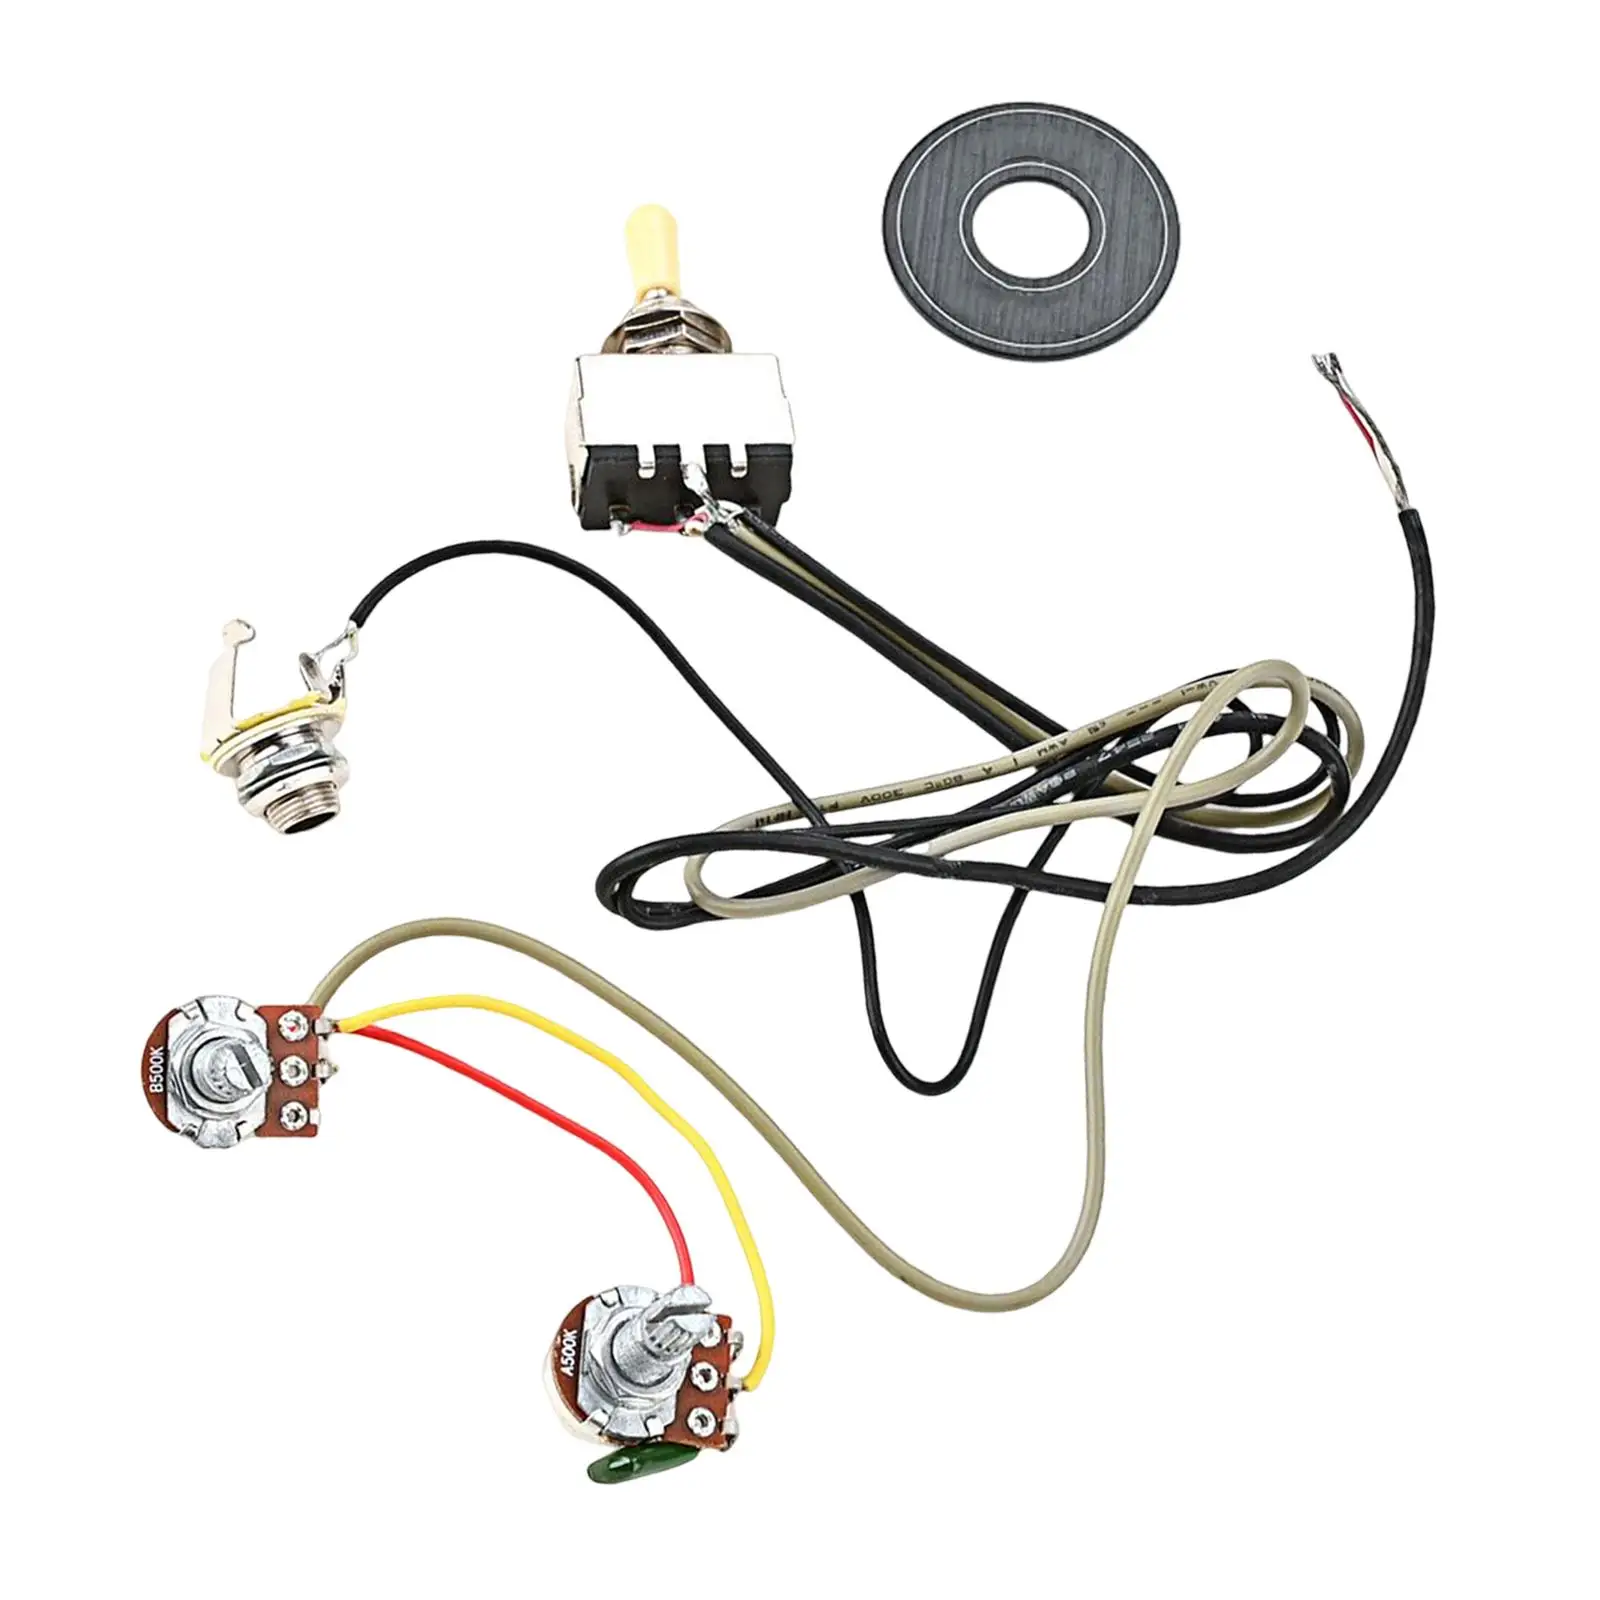 Guitar Wiring Harness Sturdy Simple to Install Audio Volume for Supplies